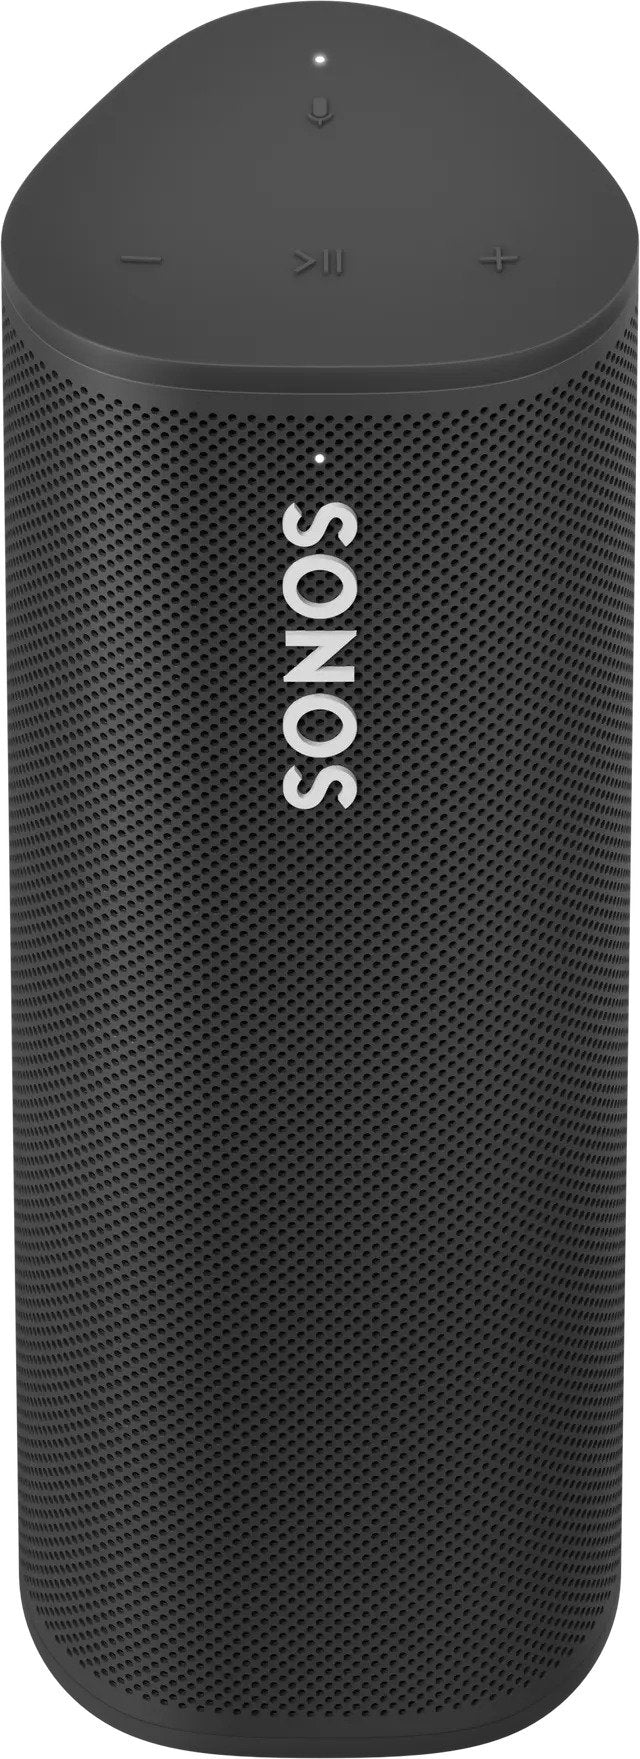 Sonos Roam with Wireless Charger Set - Black